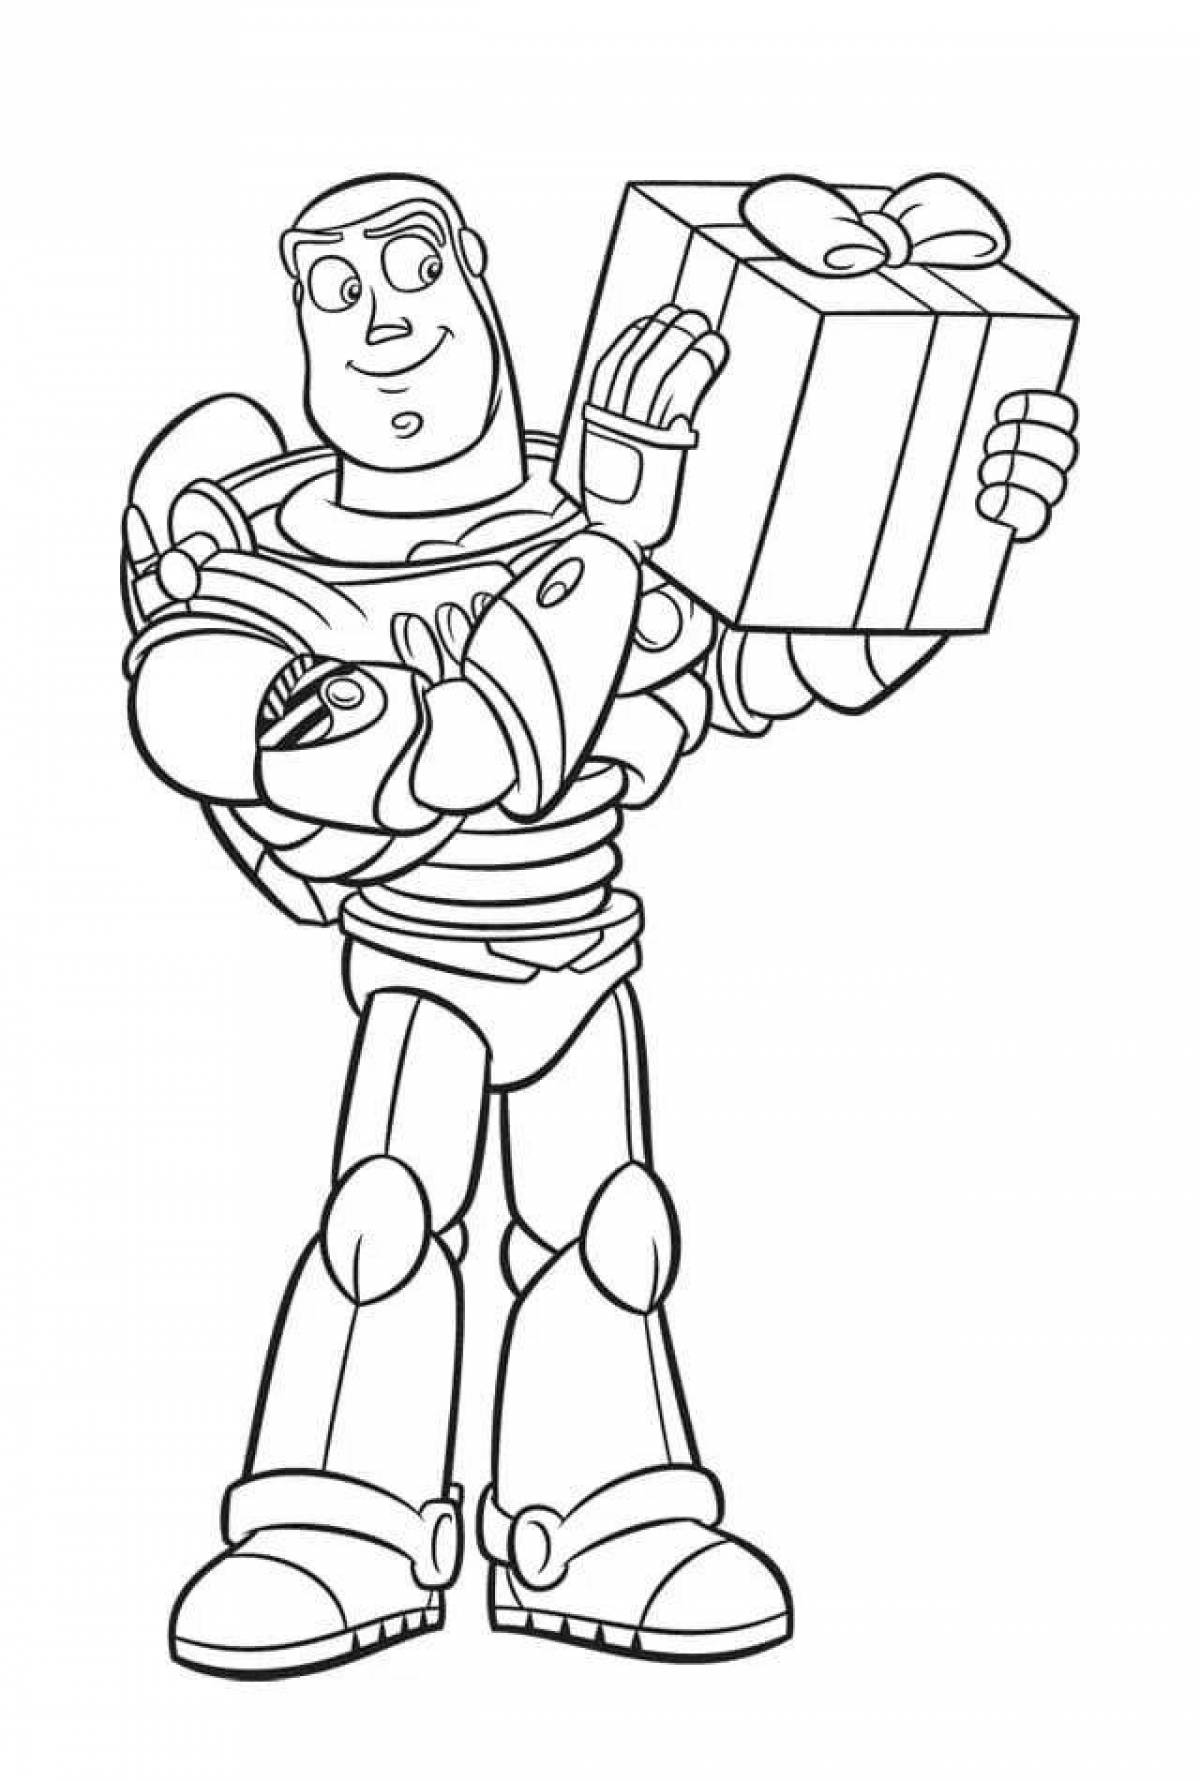 Outstanding coloring buzz lightyear